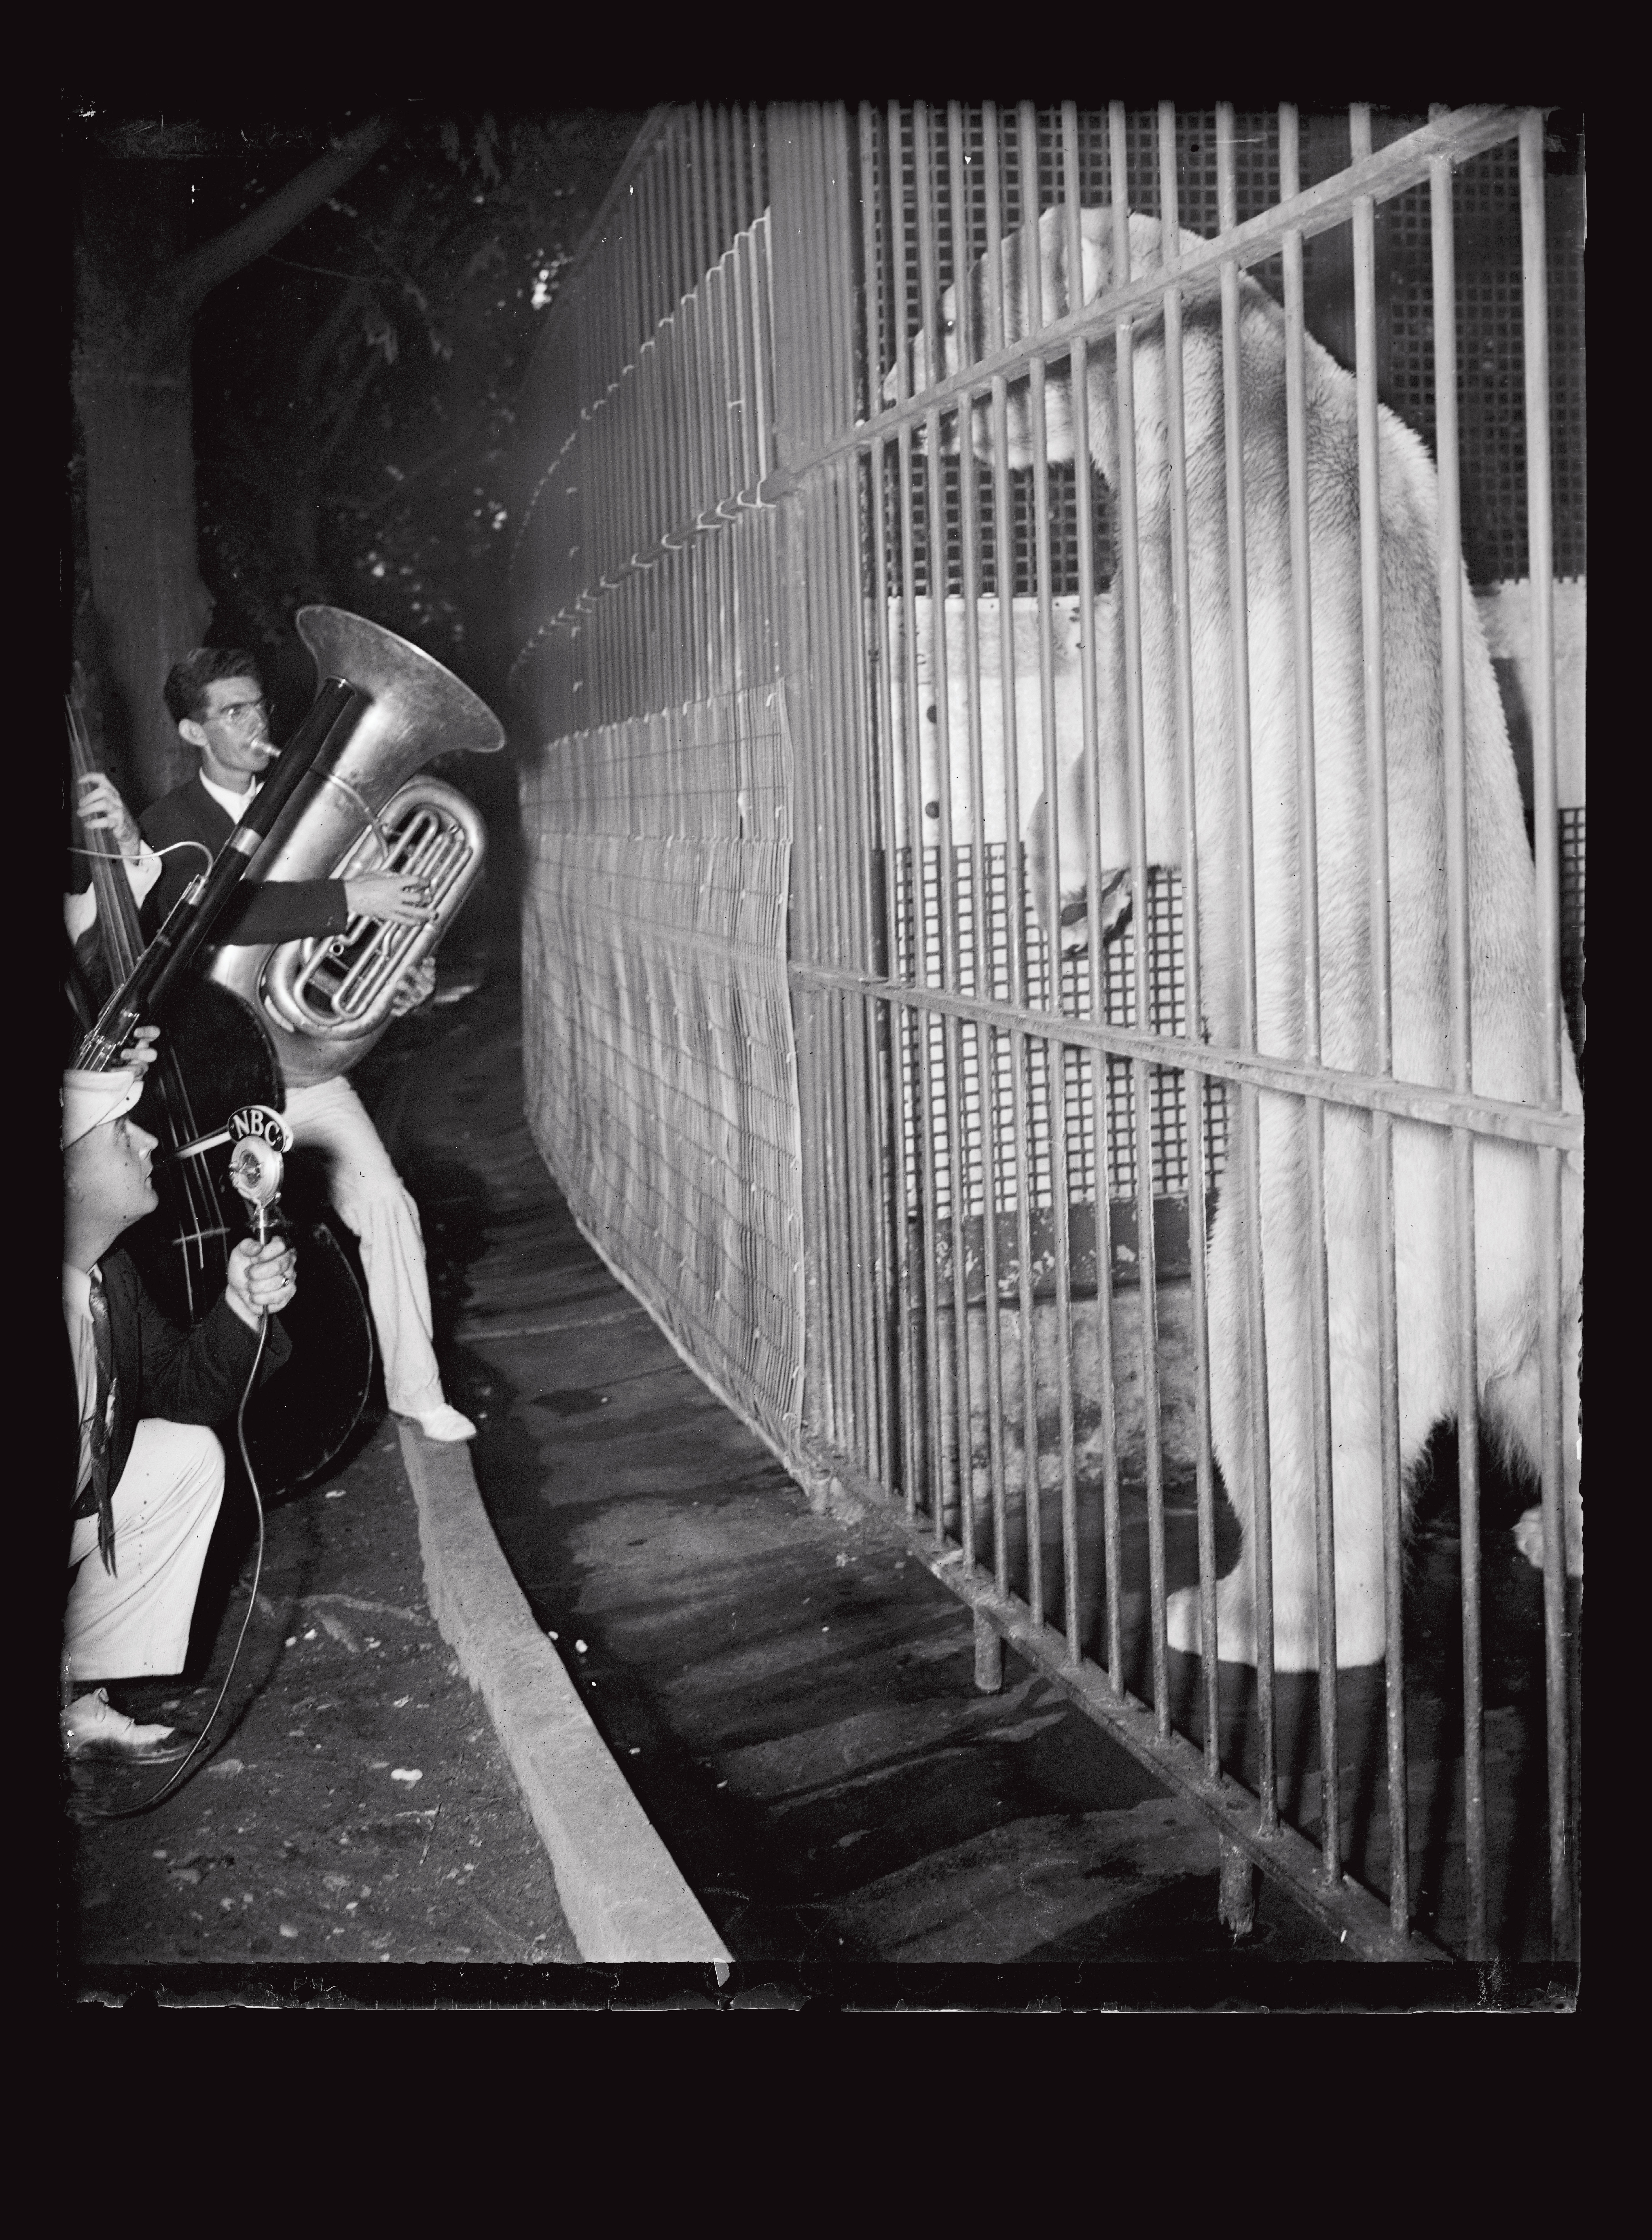 Symphonists of the Water Gate Orchestra performing music for the animals at the National Zoölogical Park, Washington, DC, USA, 1936. Washington, DC: LOC, Prints and Photographs Division. Photo: Harris & Ewing.